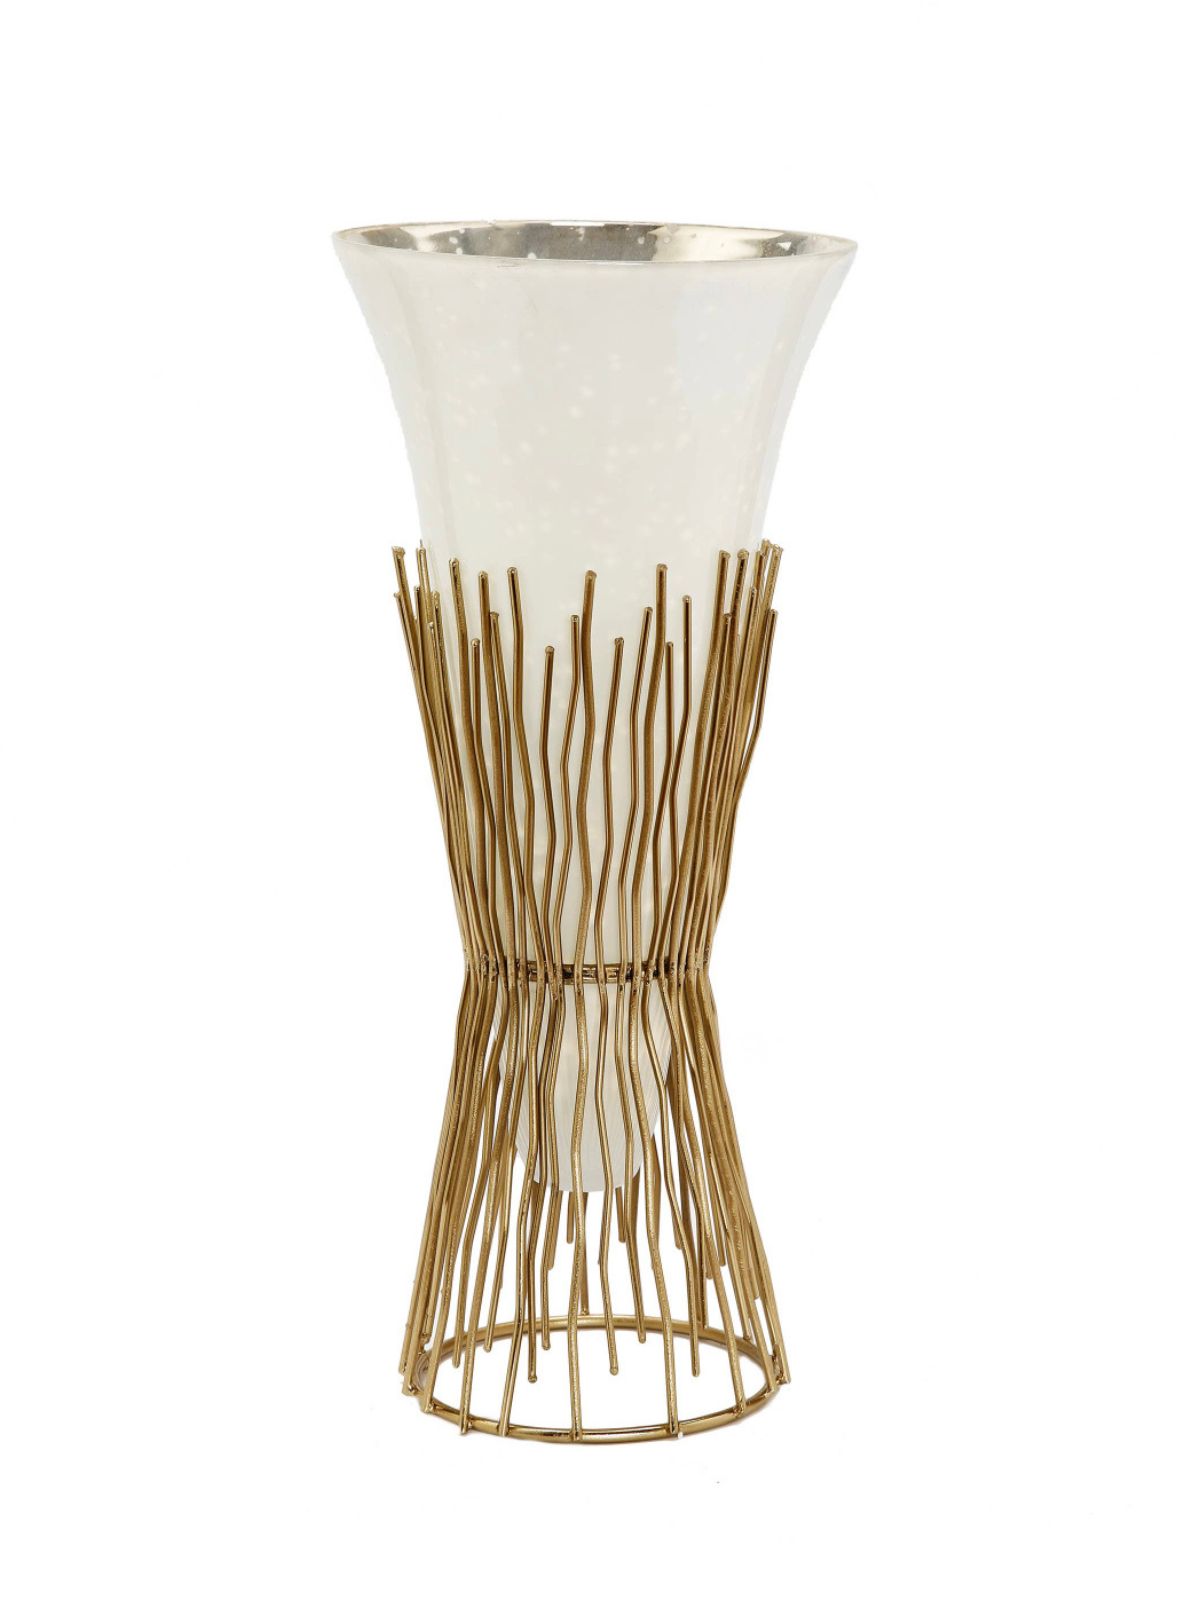 16H Opaque Glass Decorative Vase On Luxurious Glossy Gold Twig Base - KYA Home Decor